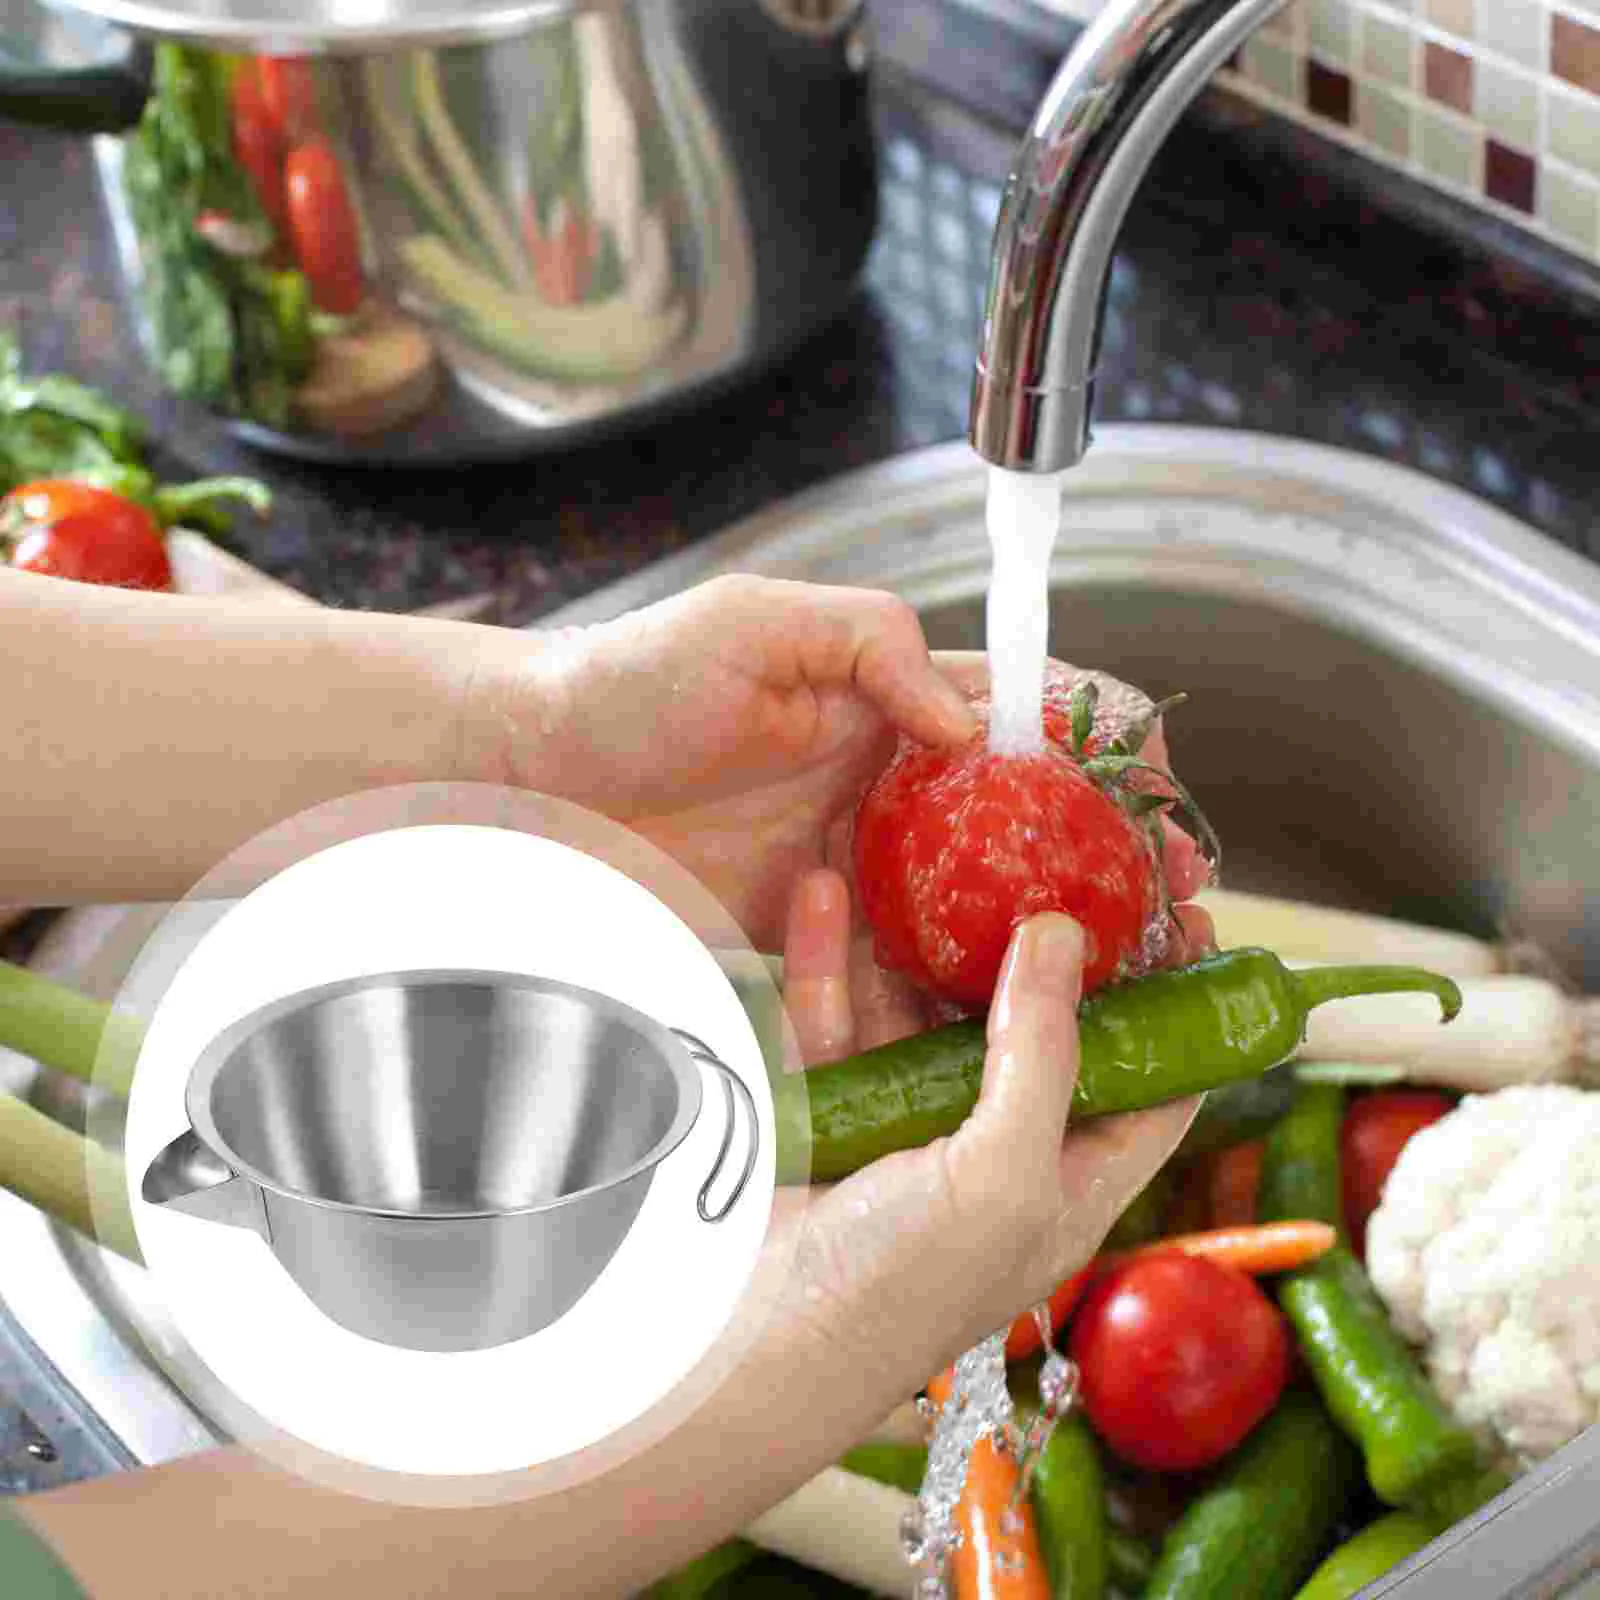 Kitchen Round Basin Vegetable Stainless Steel Colander Mixing Bowl Household Washing Thicken Large Accessory Bowls